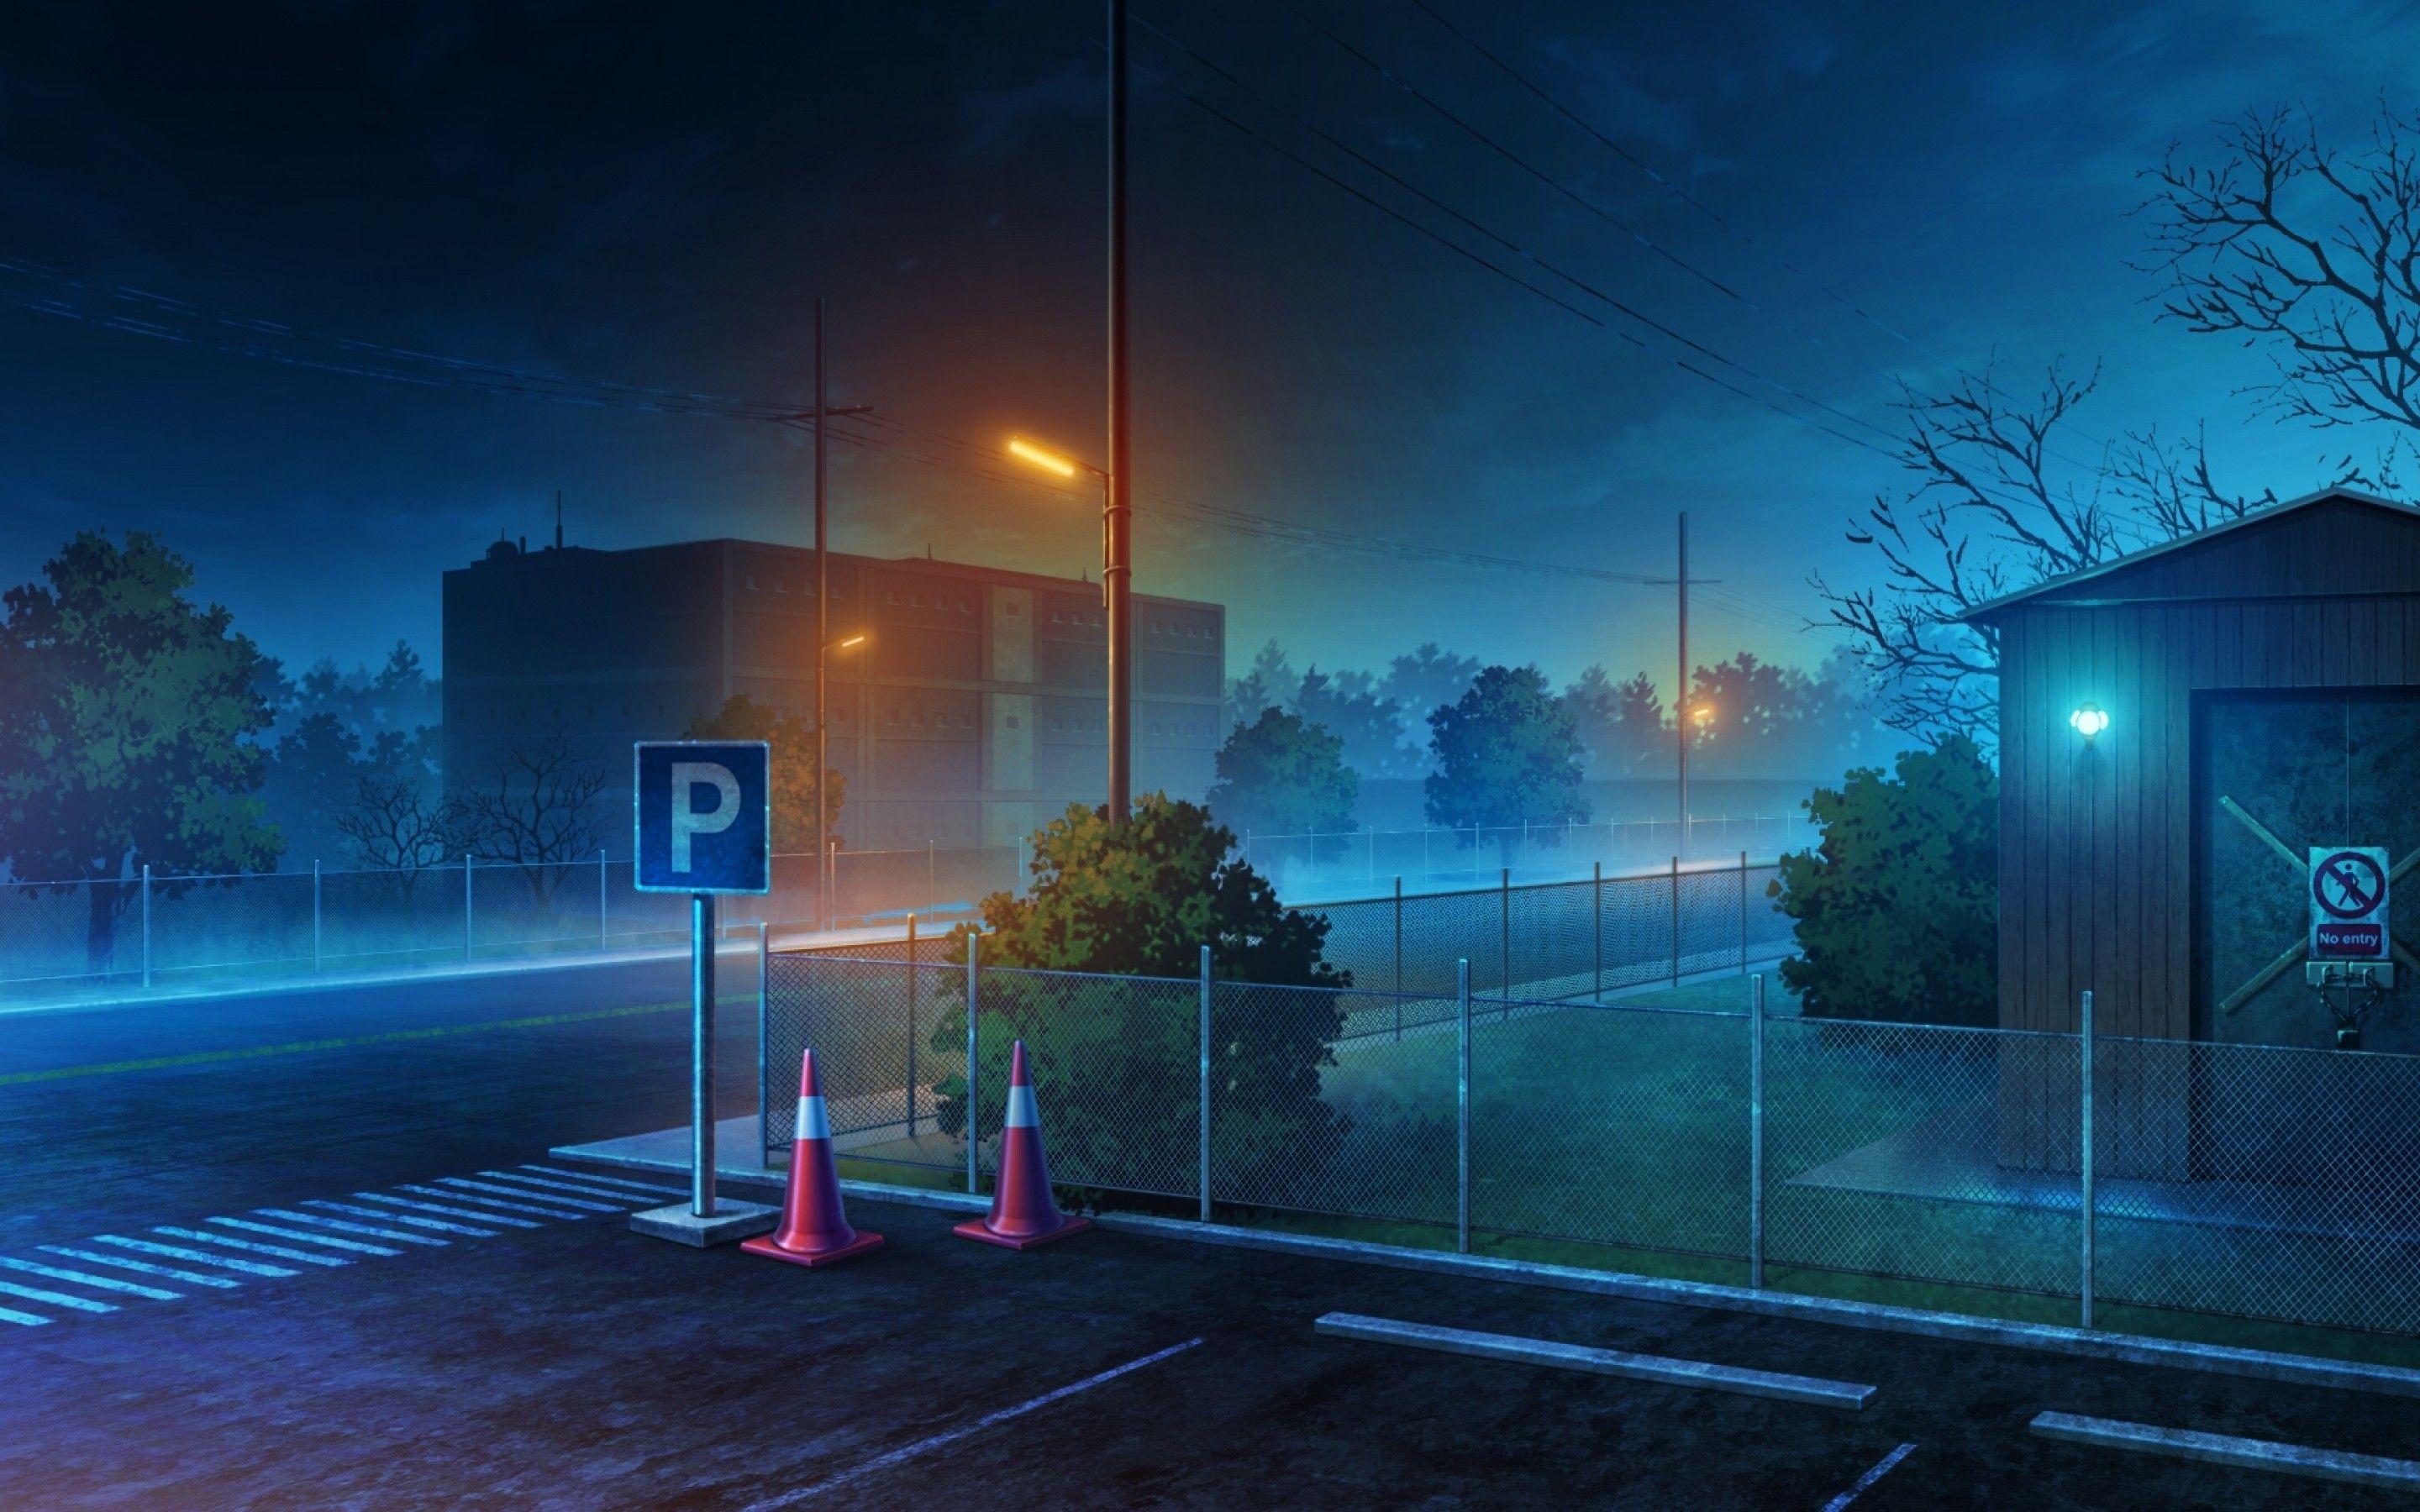 Anime Streets Night Background